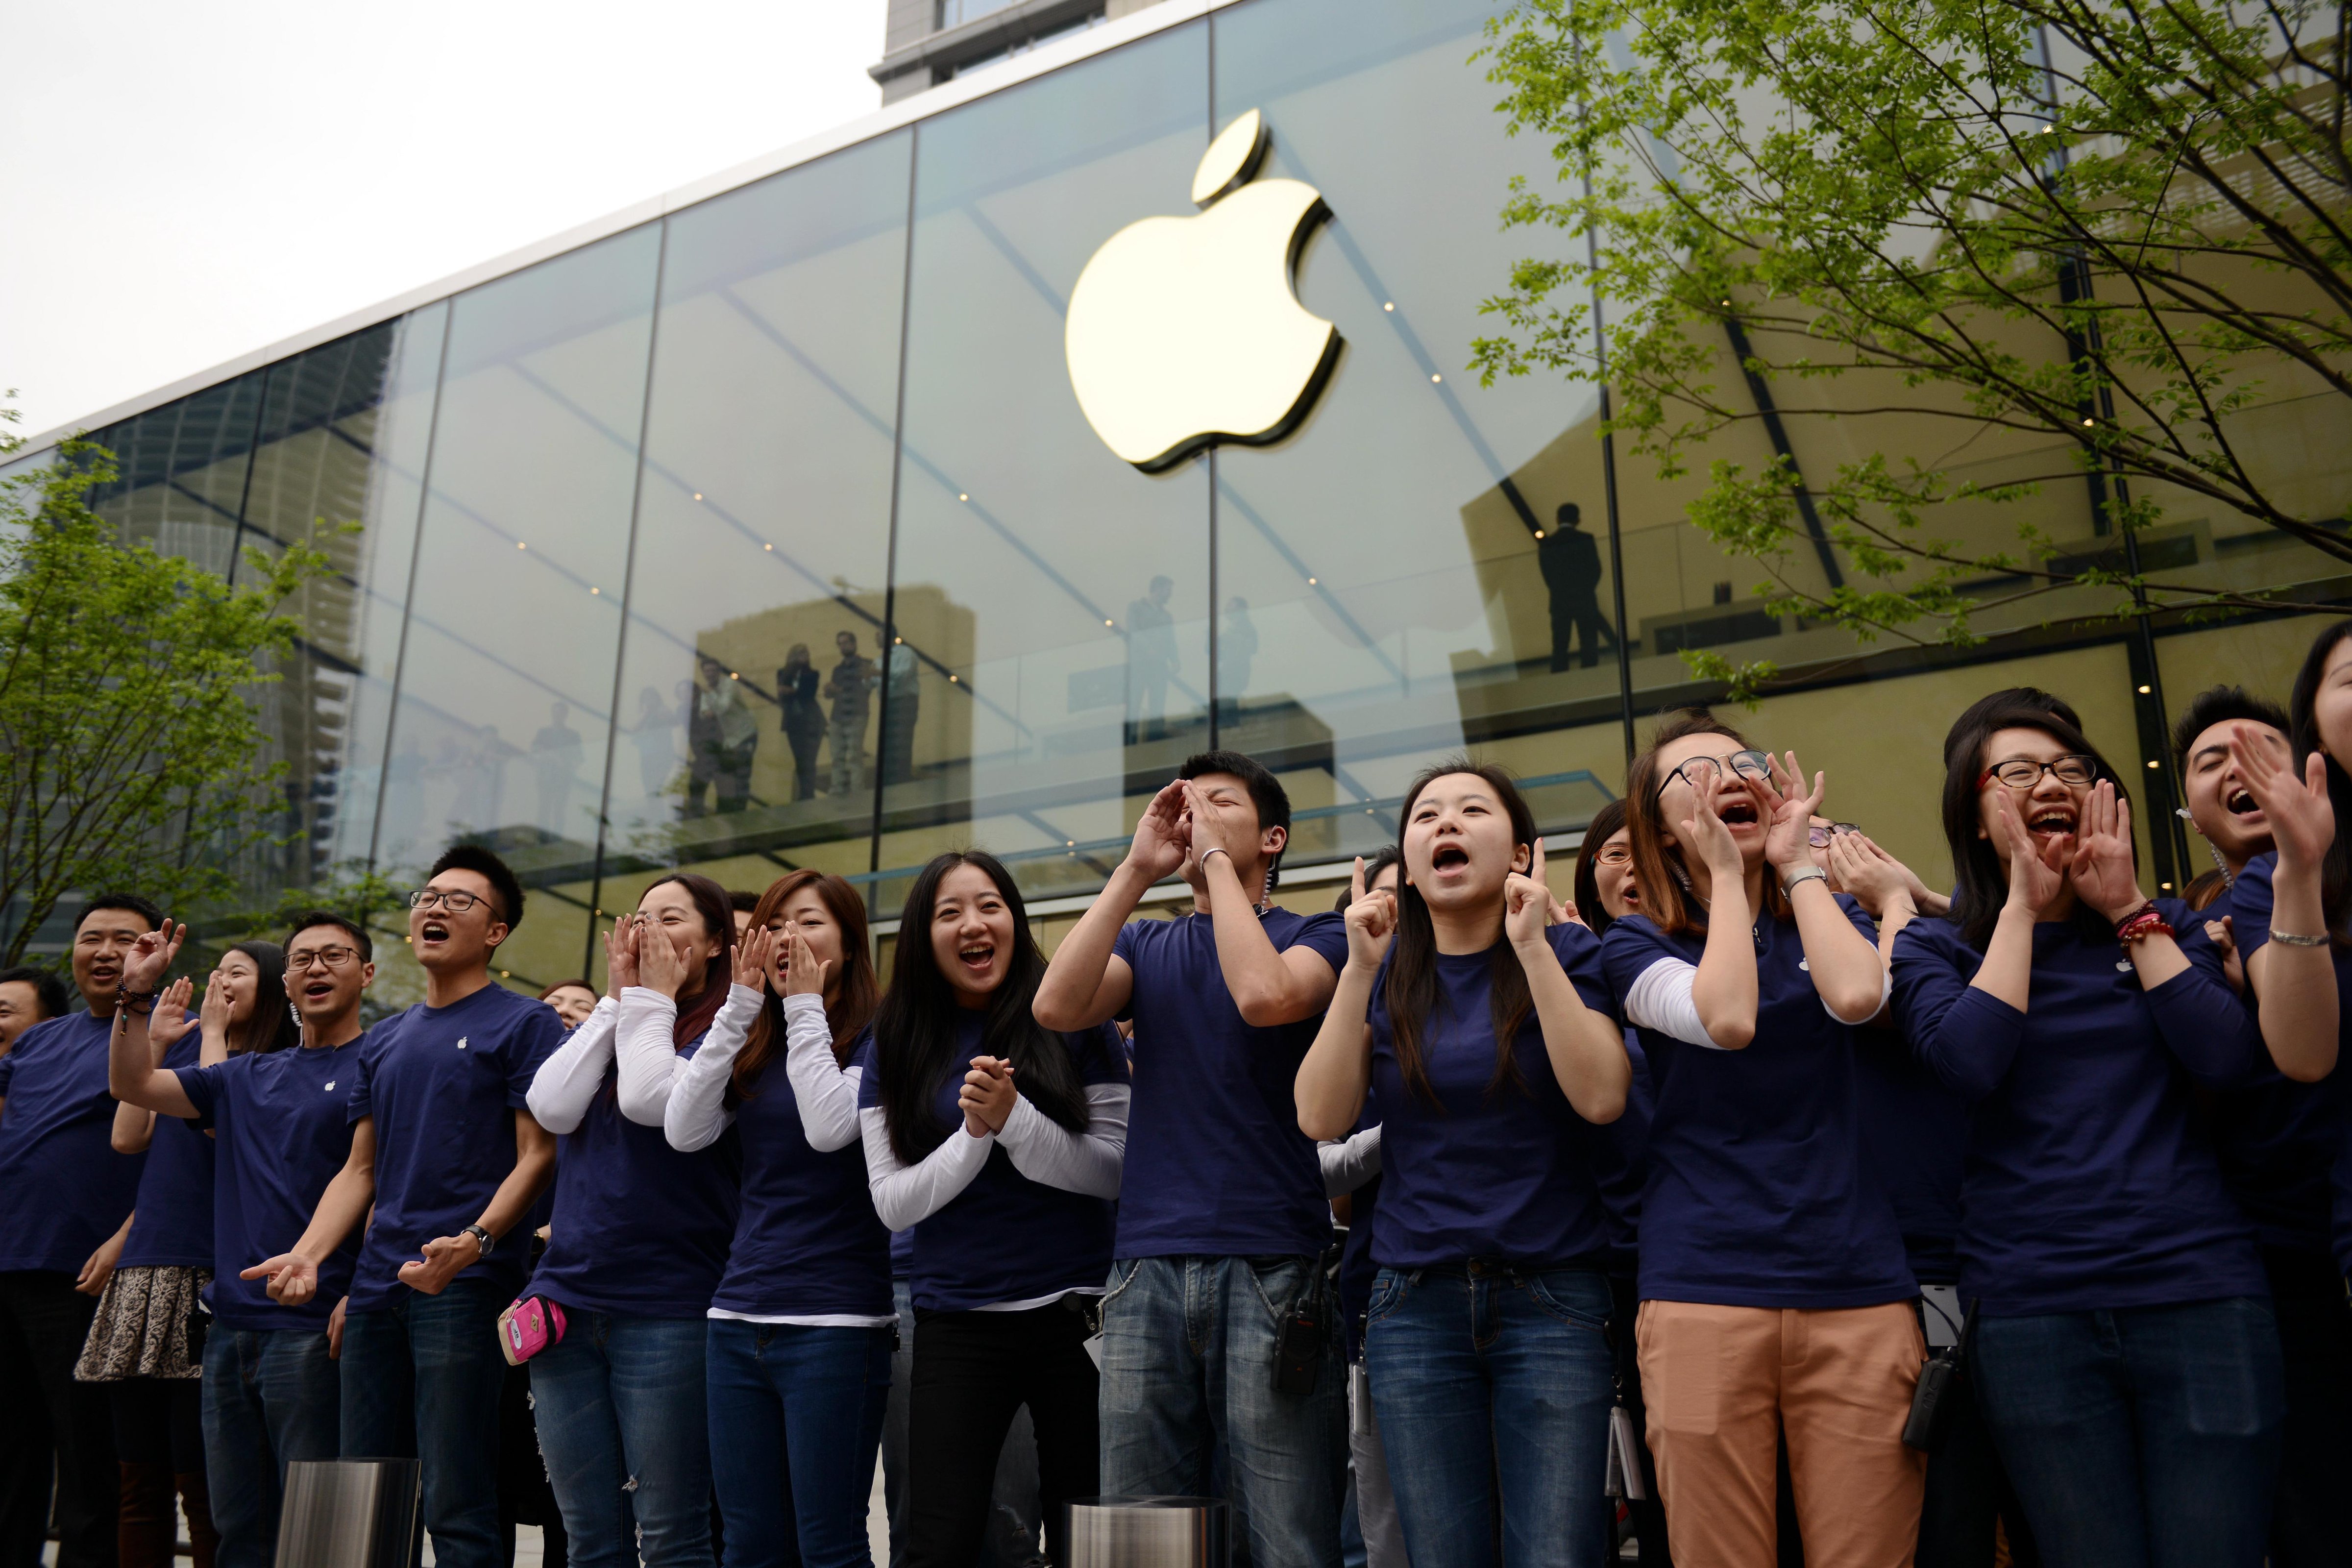 Apple Store assistants celebrate the second Apple Store open at the Mixc Mall on its first day open on April 24, 2015 in Hangzhou, Zhejiang province of China. (ChinaFotoPress—ChinaFotoPress via Getty Images)